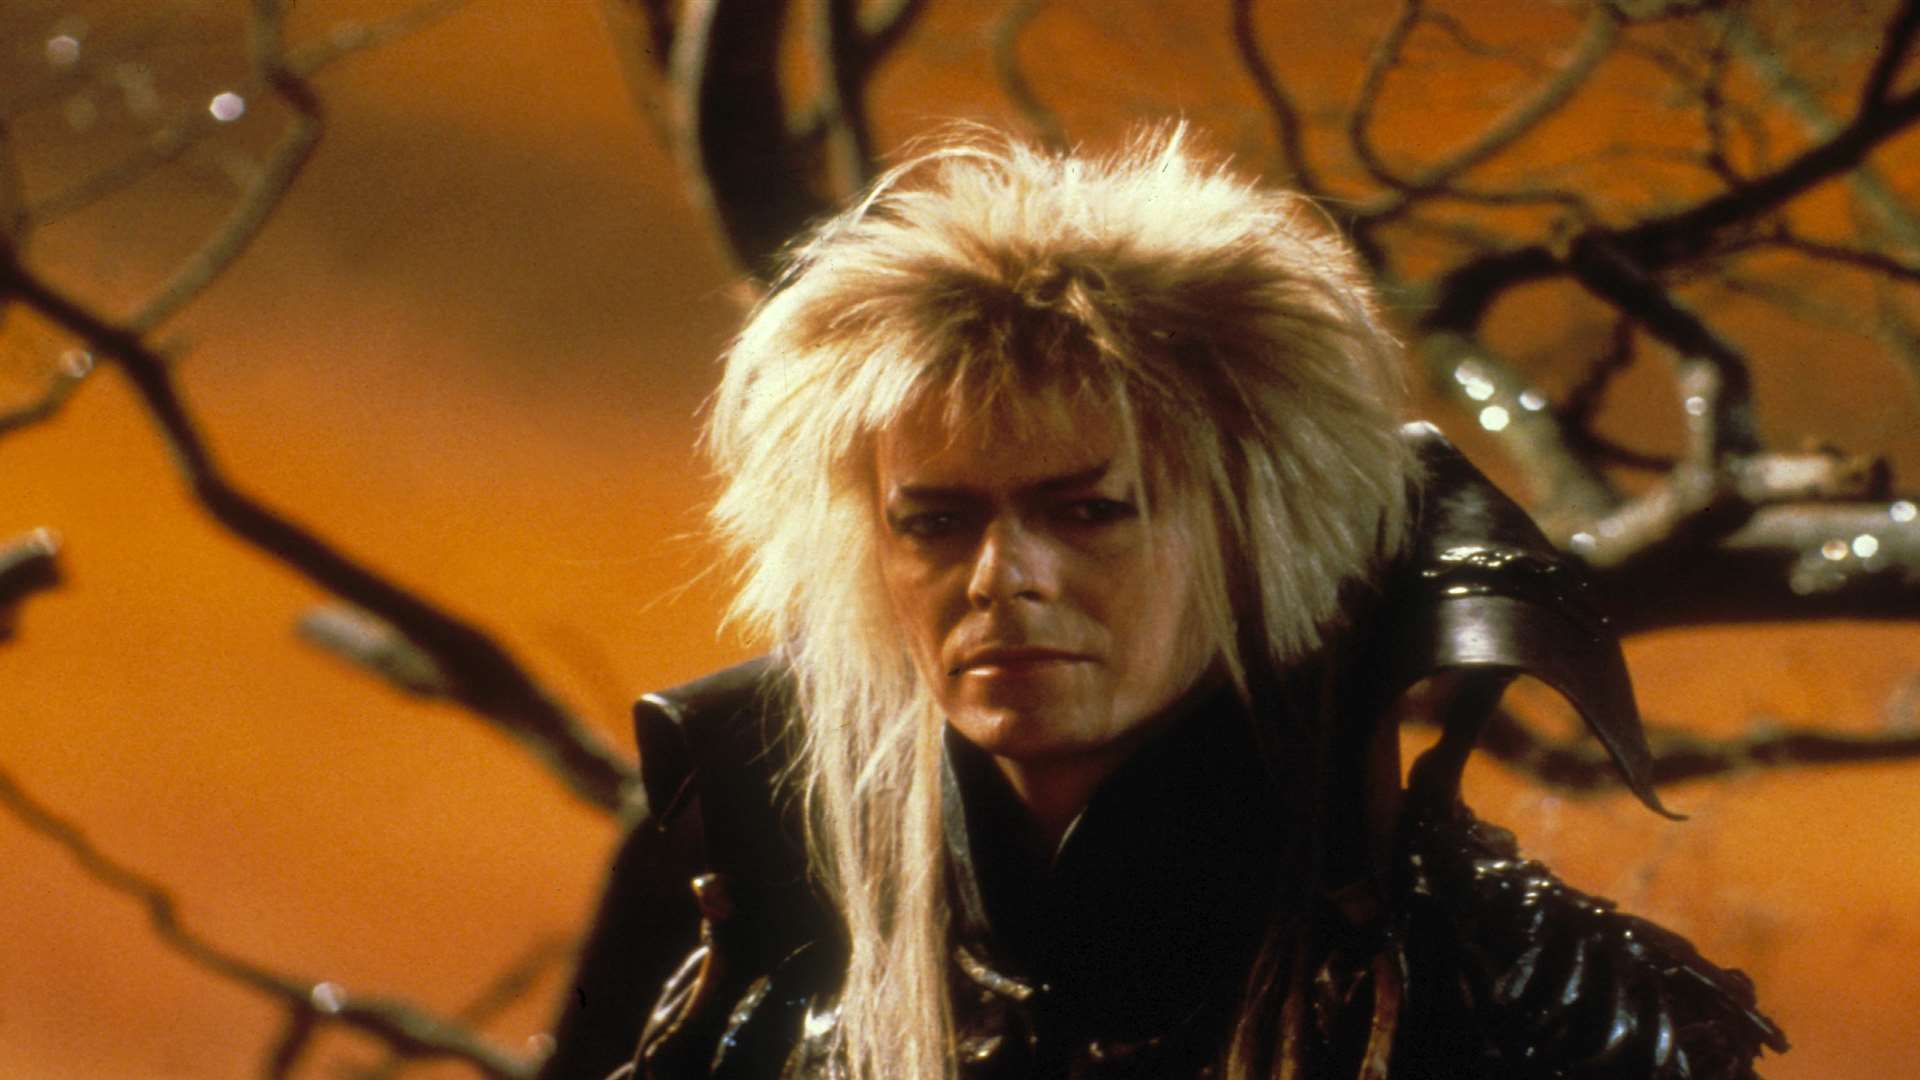 Labyrinth: the Unsettling Second Character Played by David Bowie